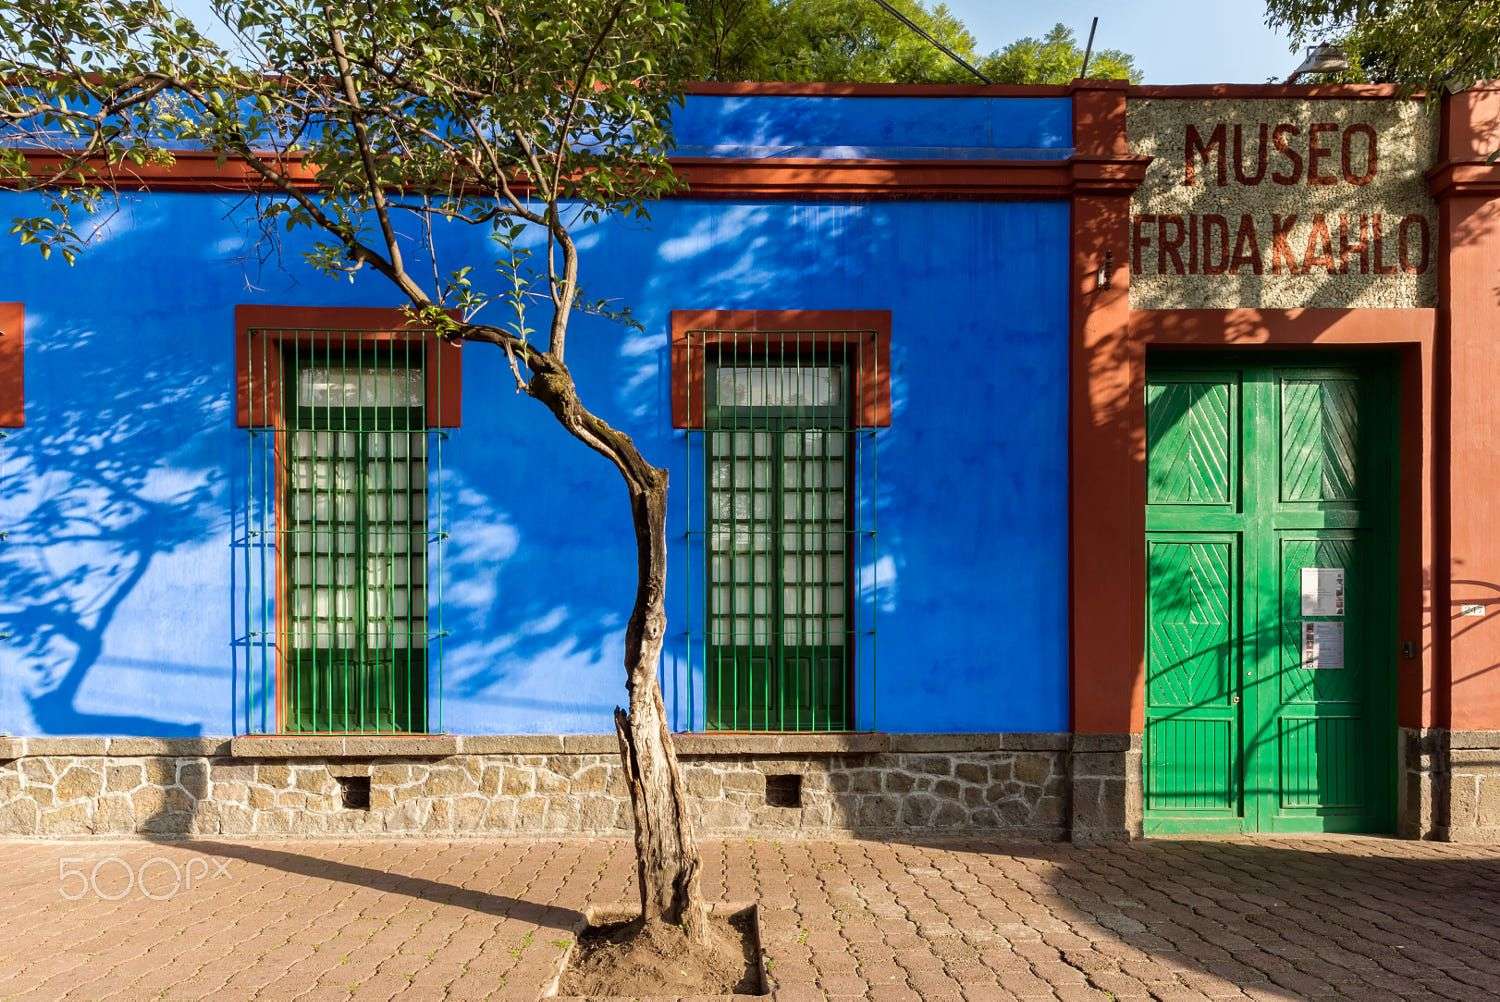 Frida Kahlo Museum Exterior, Mexico City by Uwe Duerr on 500px